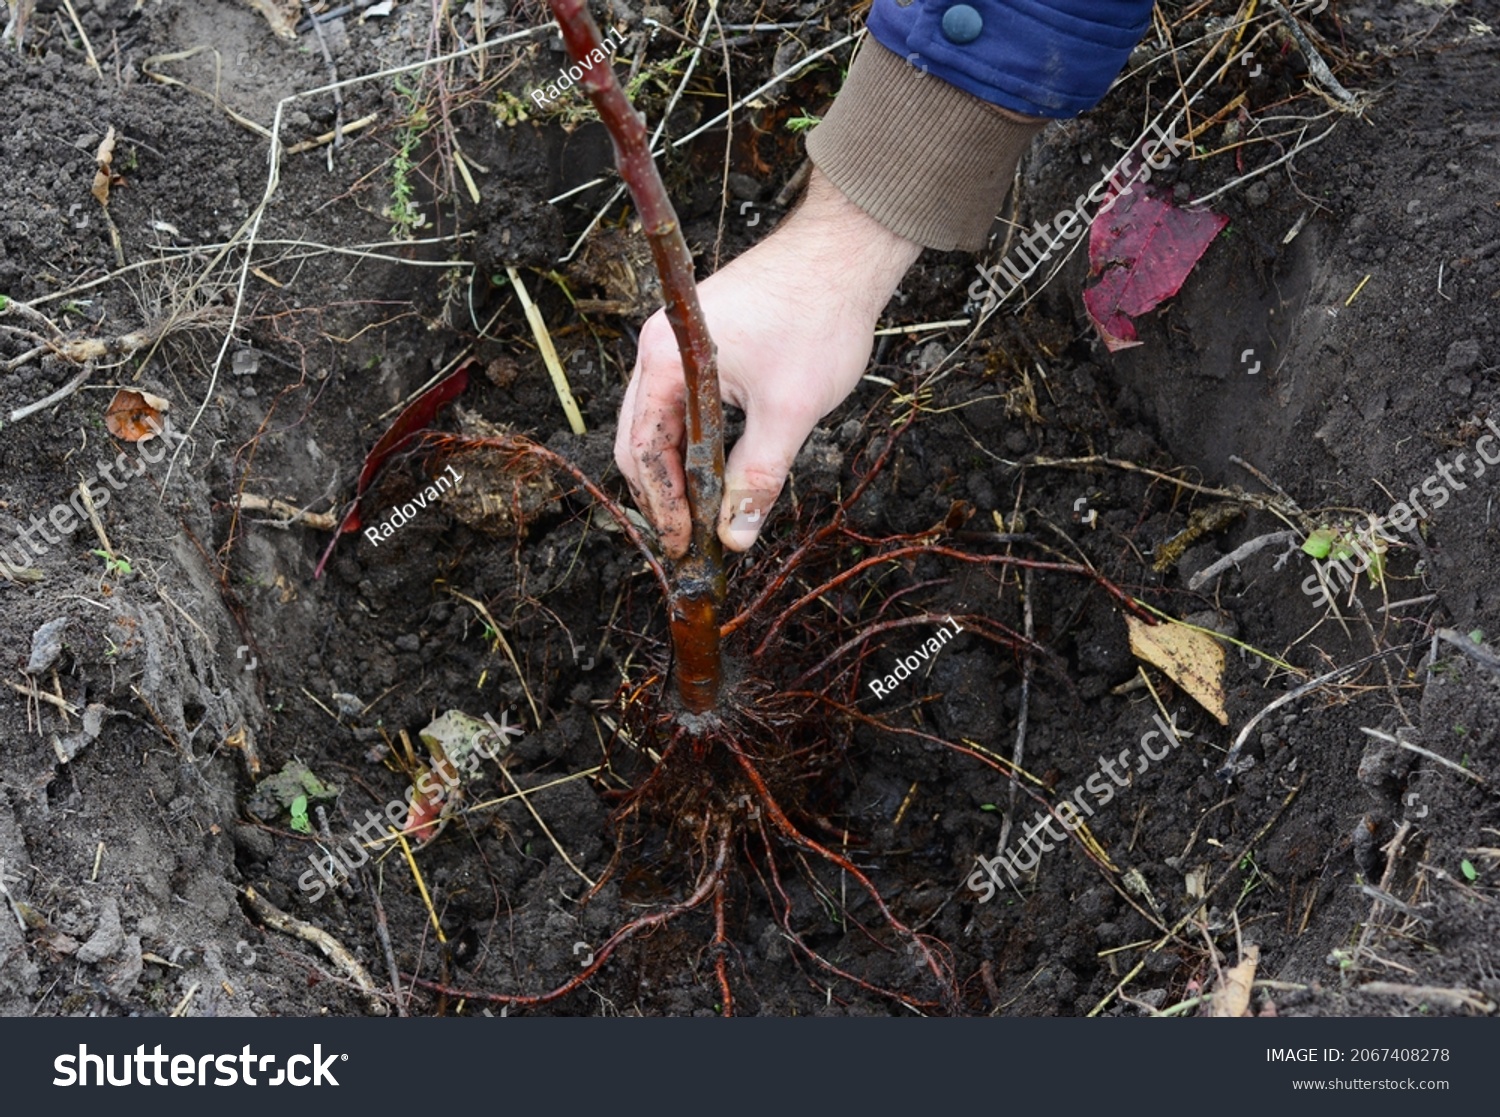 Planting a grafted apple tree in autumn. A close-up of a fruit tree roots spread in a planting hole.  #2067408278